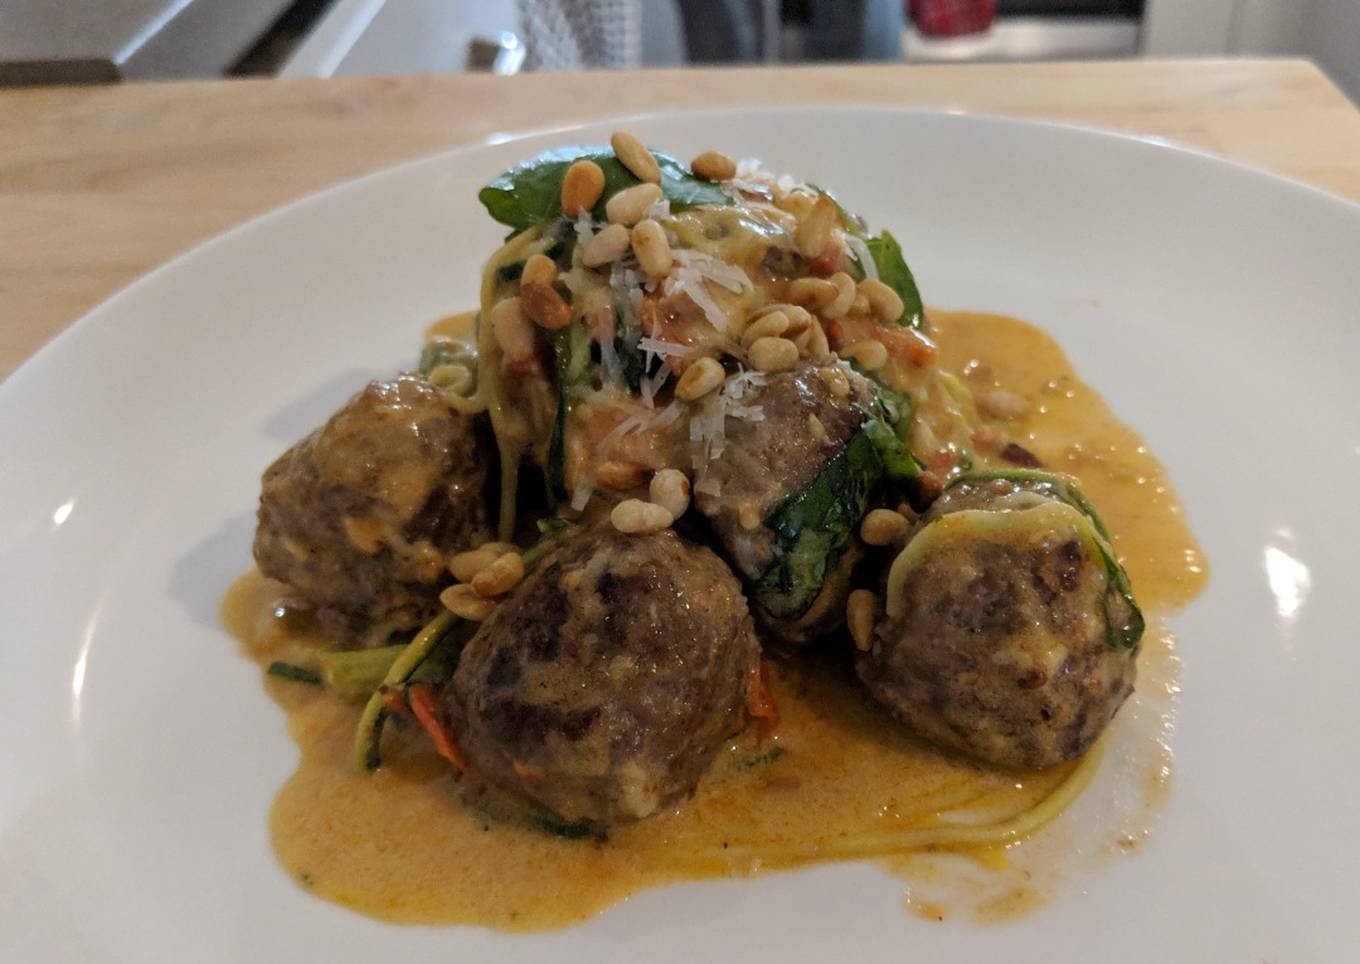 Courgetti and Meatballs